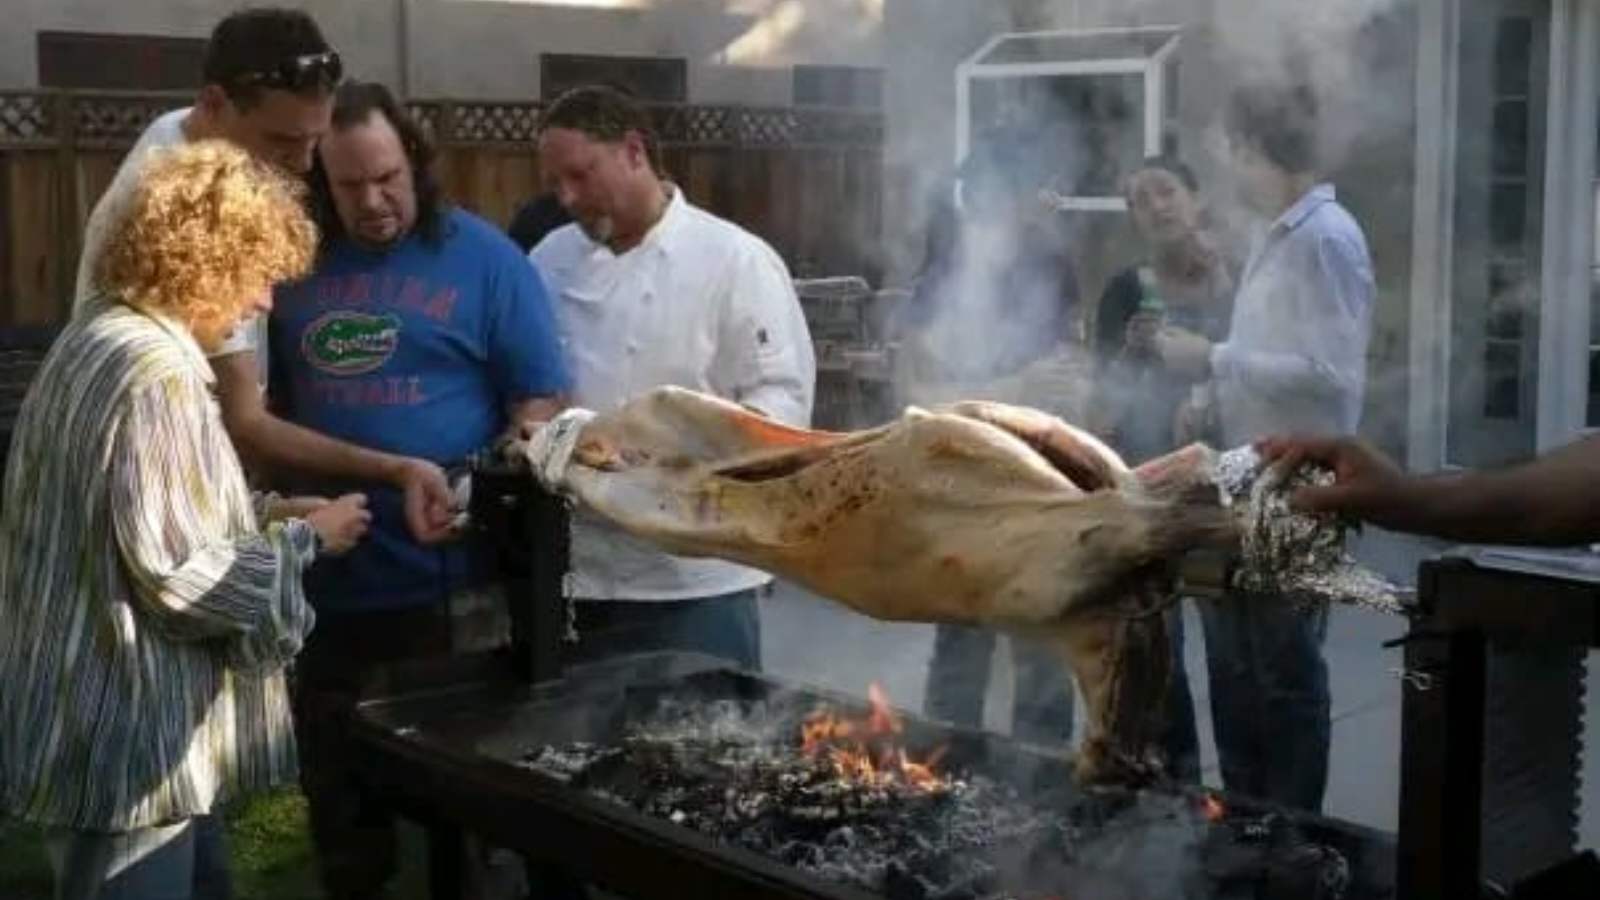 Picture from Mark Zuckerberg's barbecue party